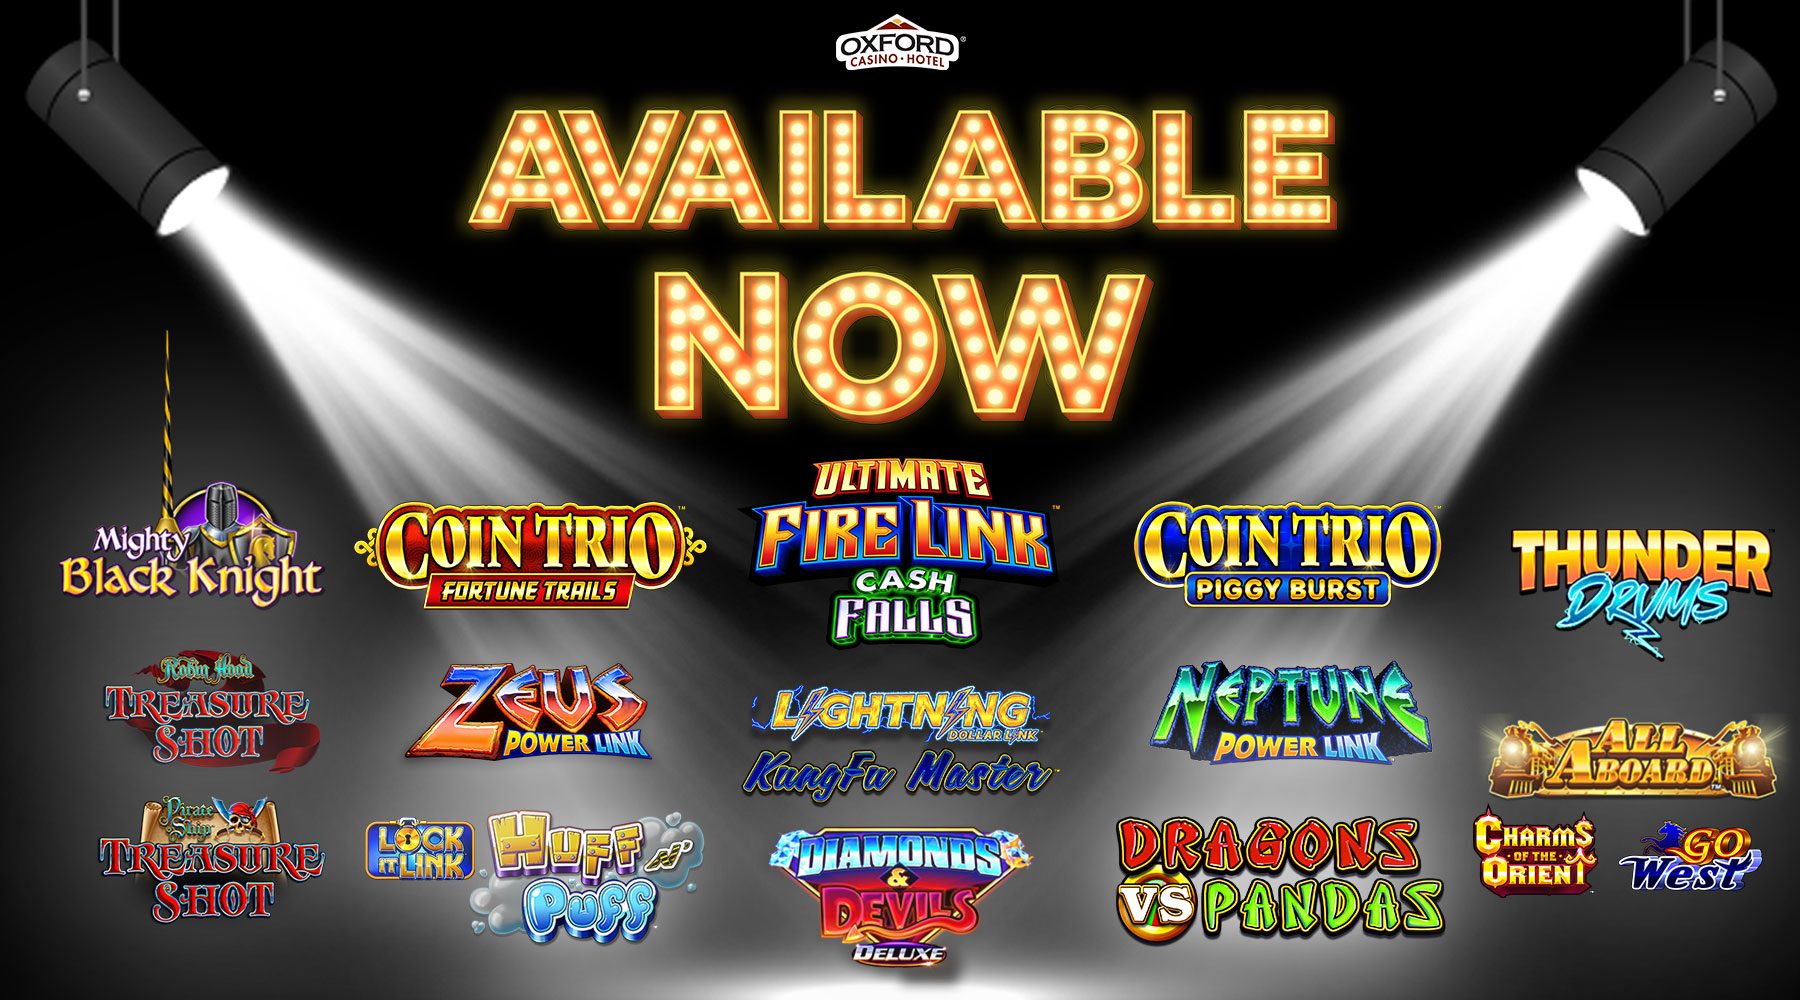 New Slot Machine games and themes available now at Oxford Casino Hotel